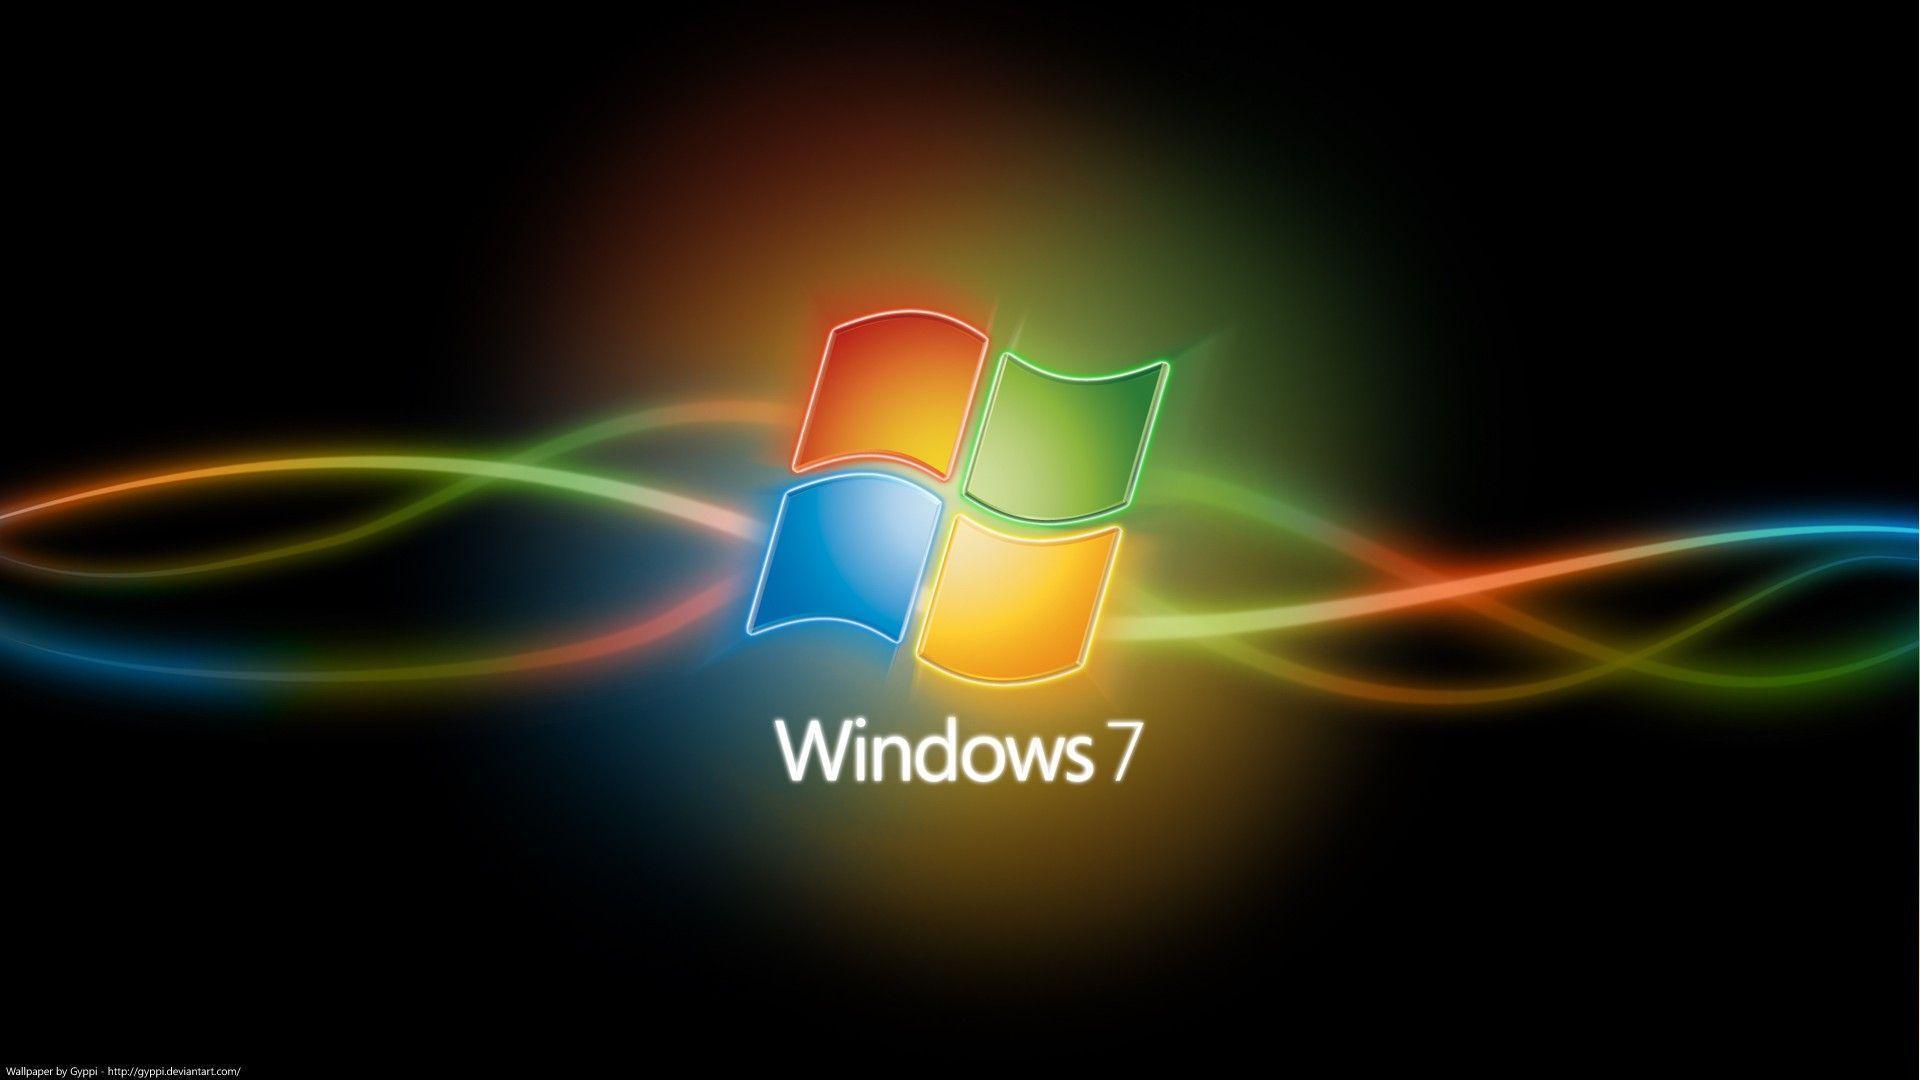 The Image of Windows 7 Logos 1920x1080 HD Wallpapers